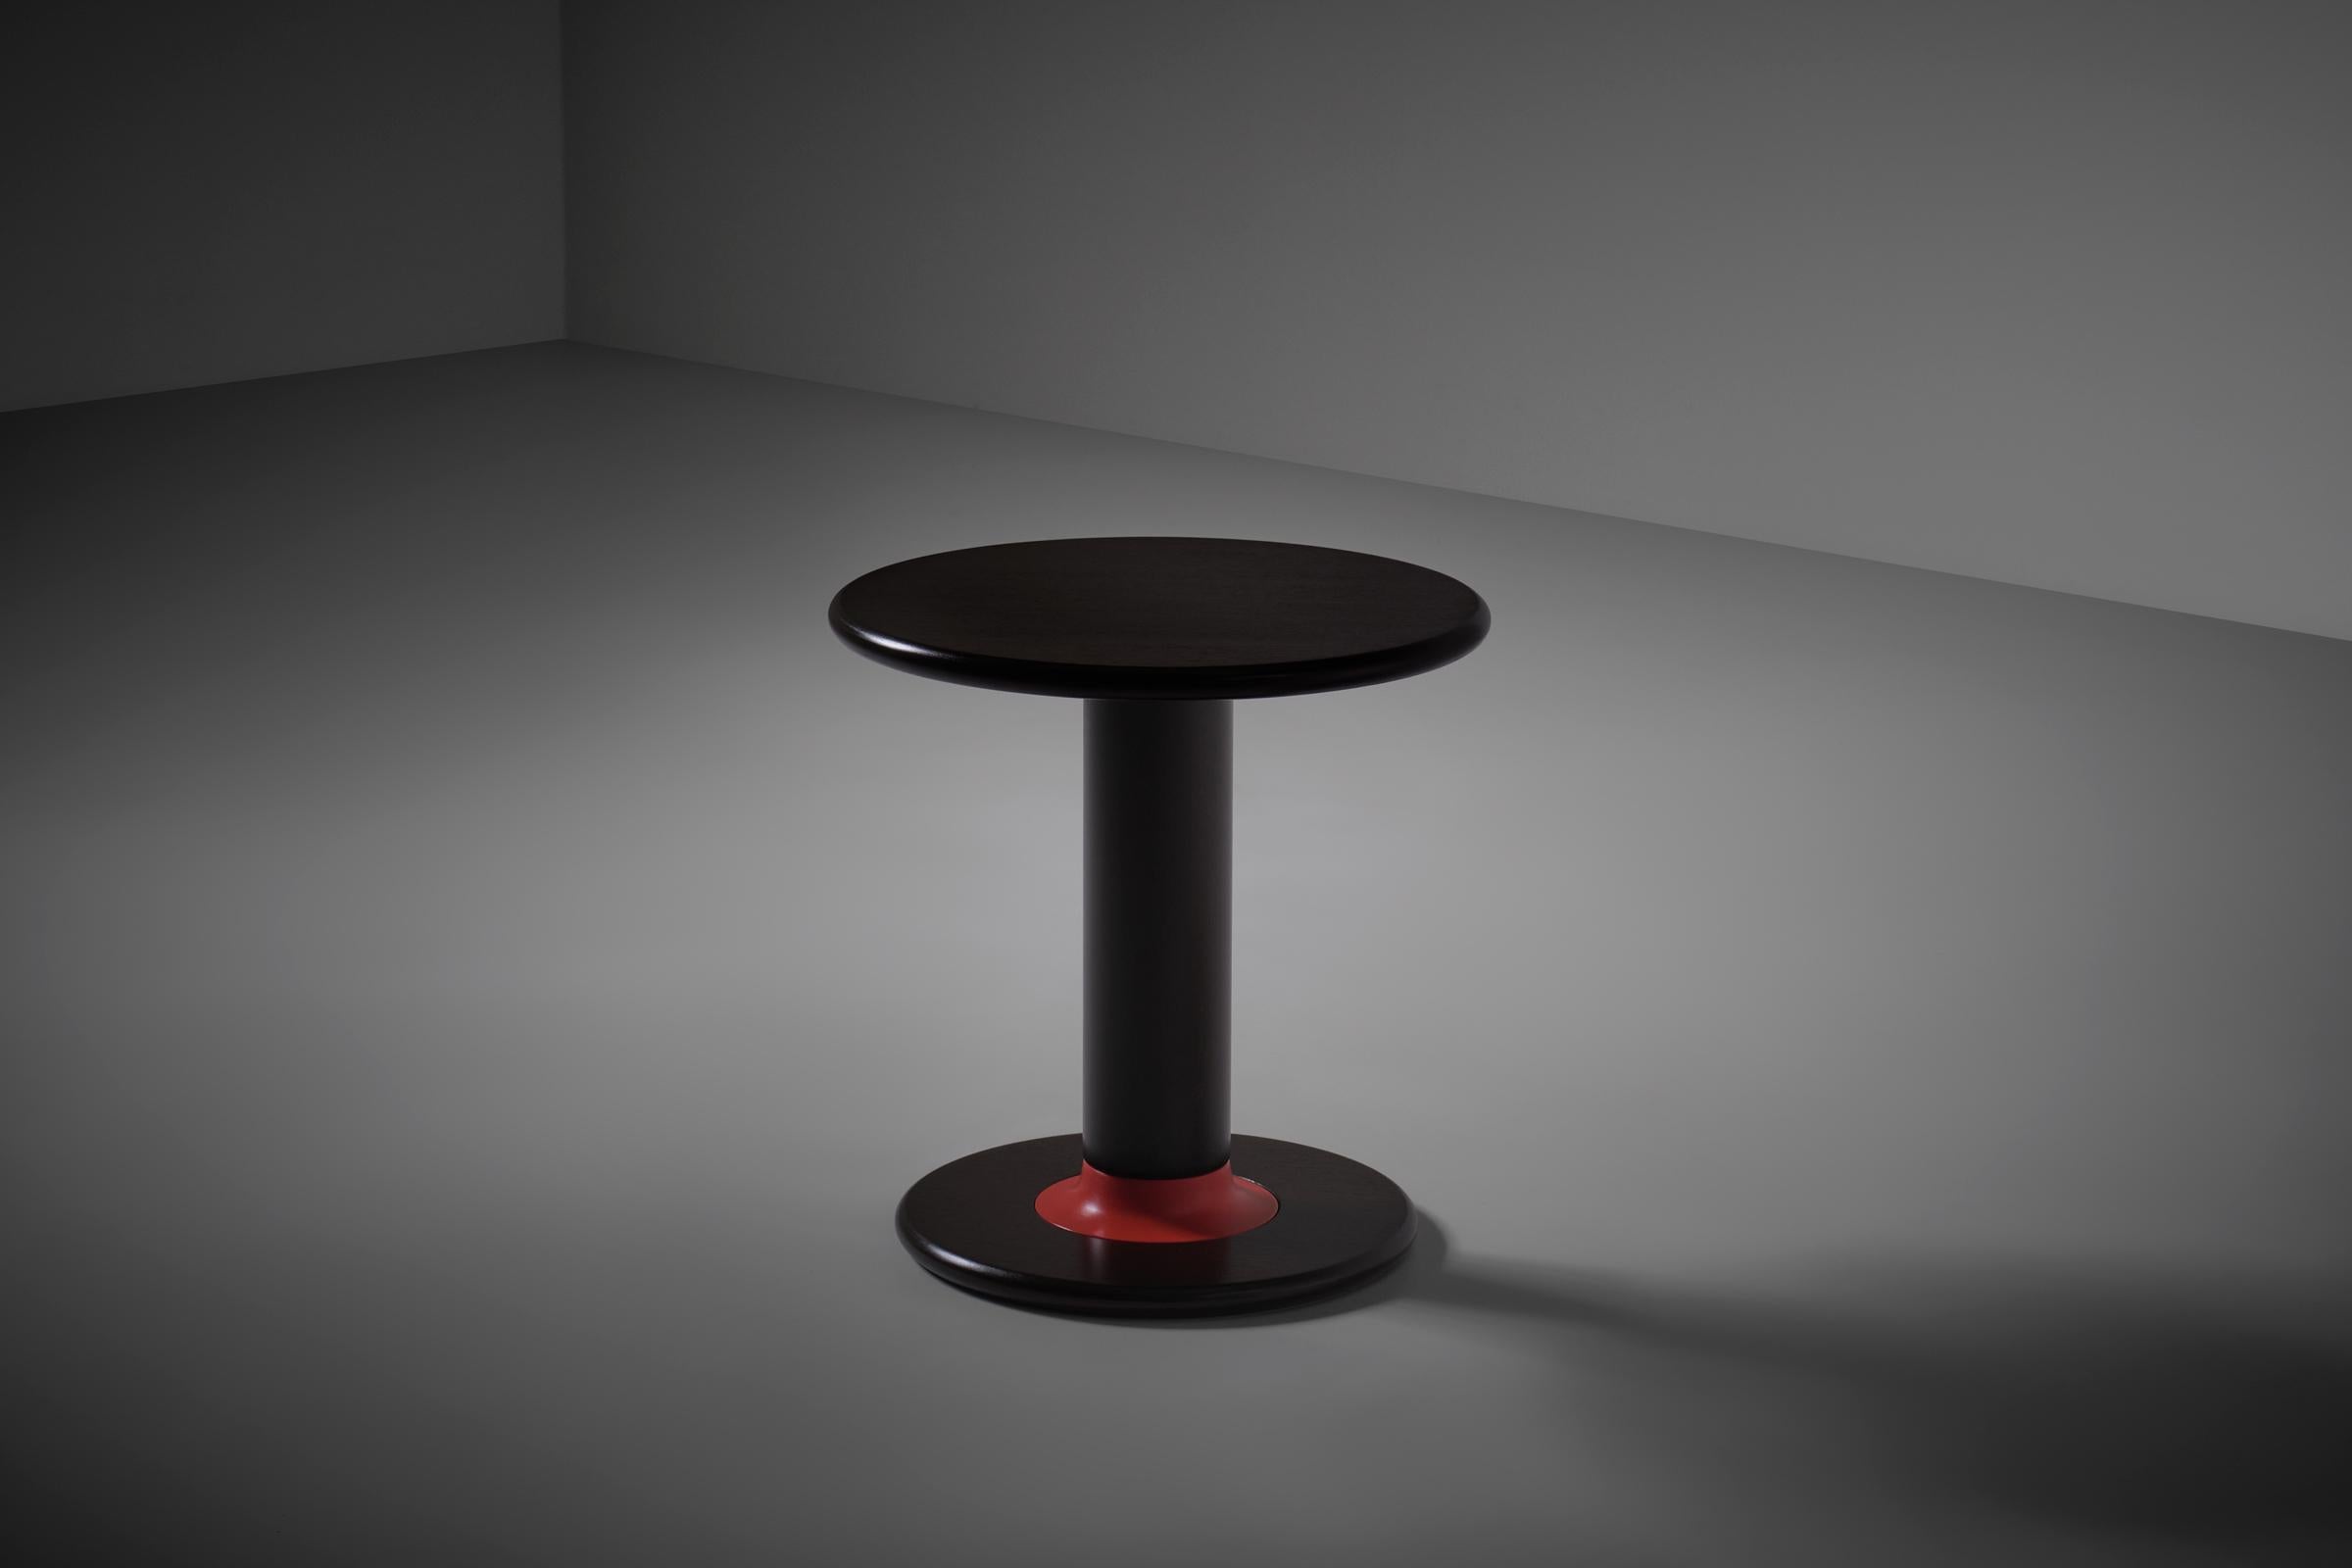 Ettore Sottsass mod. T44 'Rocchetto' side table for Poltronova, Italy 1964 mod. Modest design yet sophisticated and interesting in color contrast and use of materials; the dark stained Walnut creates a nice contrast with the coral colored trumpet